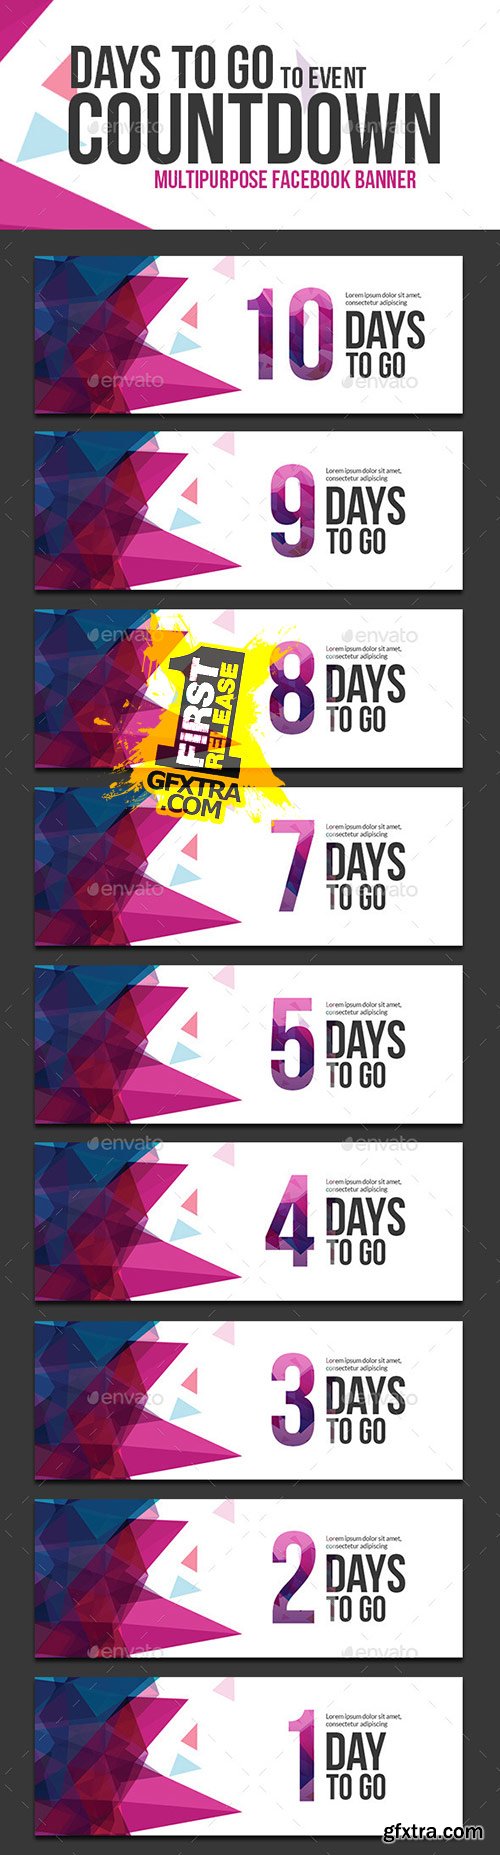 GraphicRiver - Days to go Countdown Banner 11338341